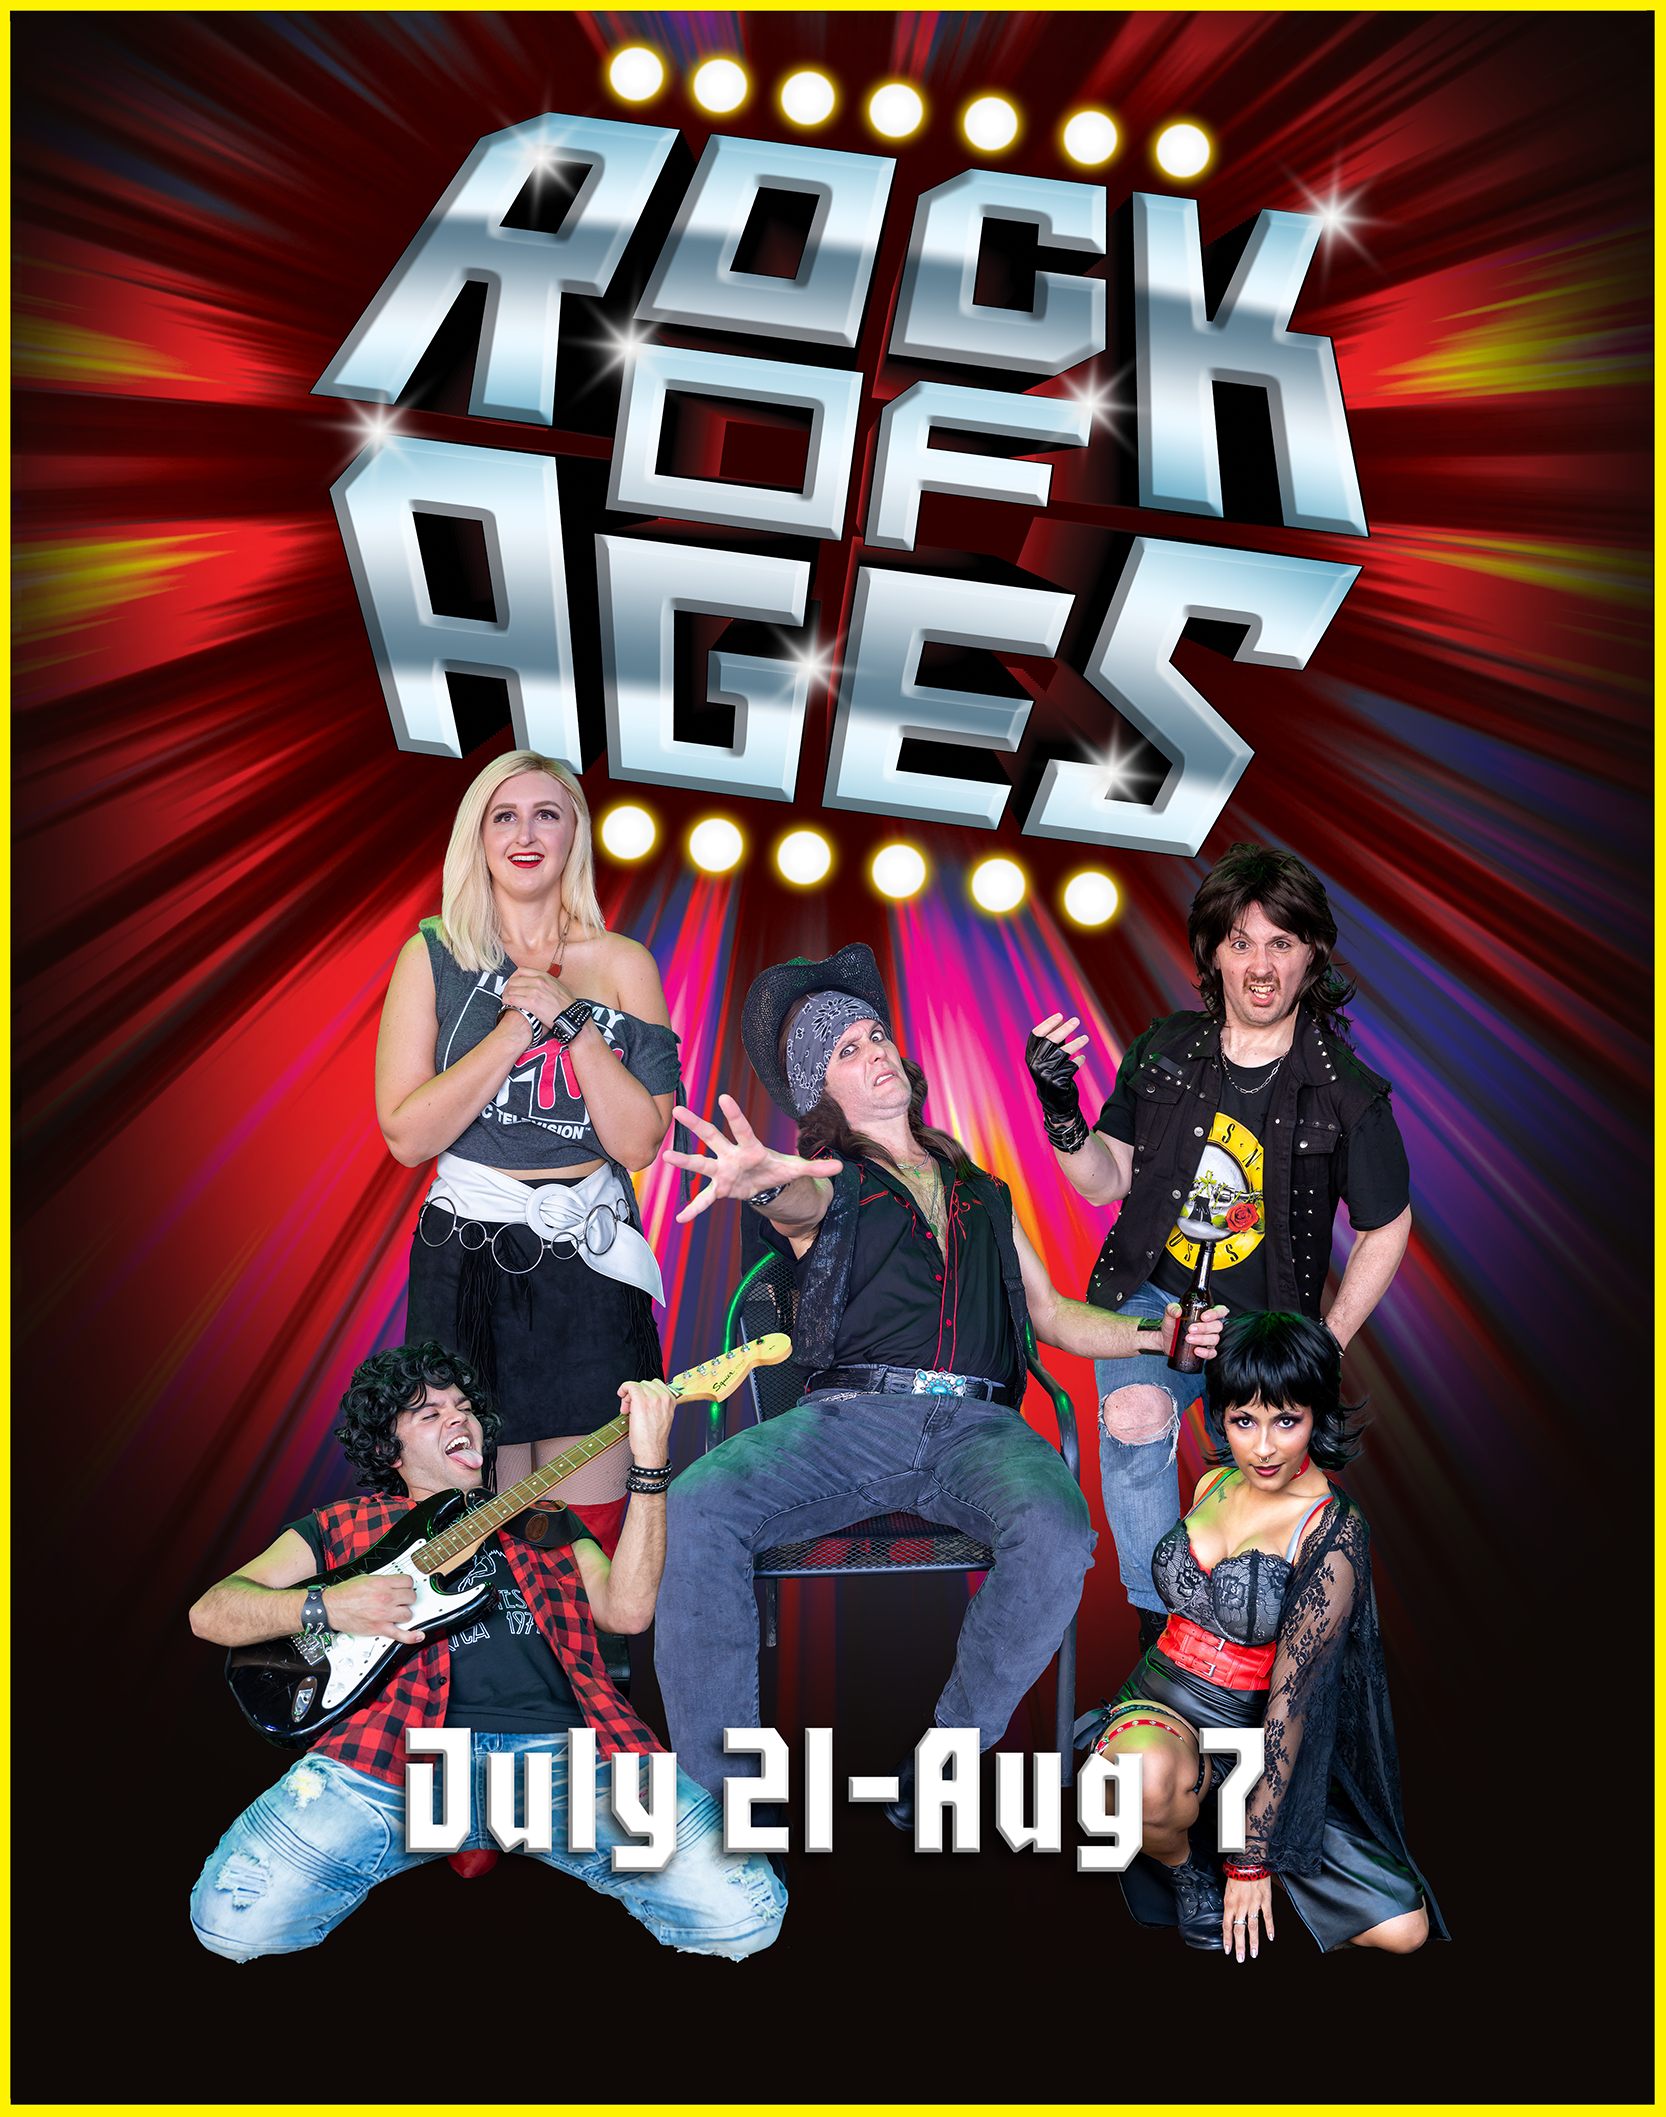 rock of ages logo